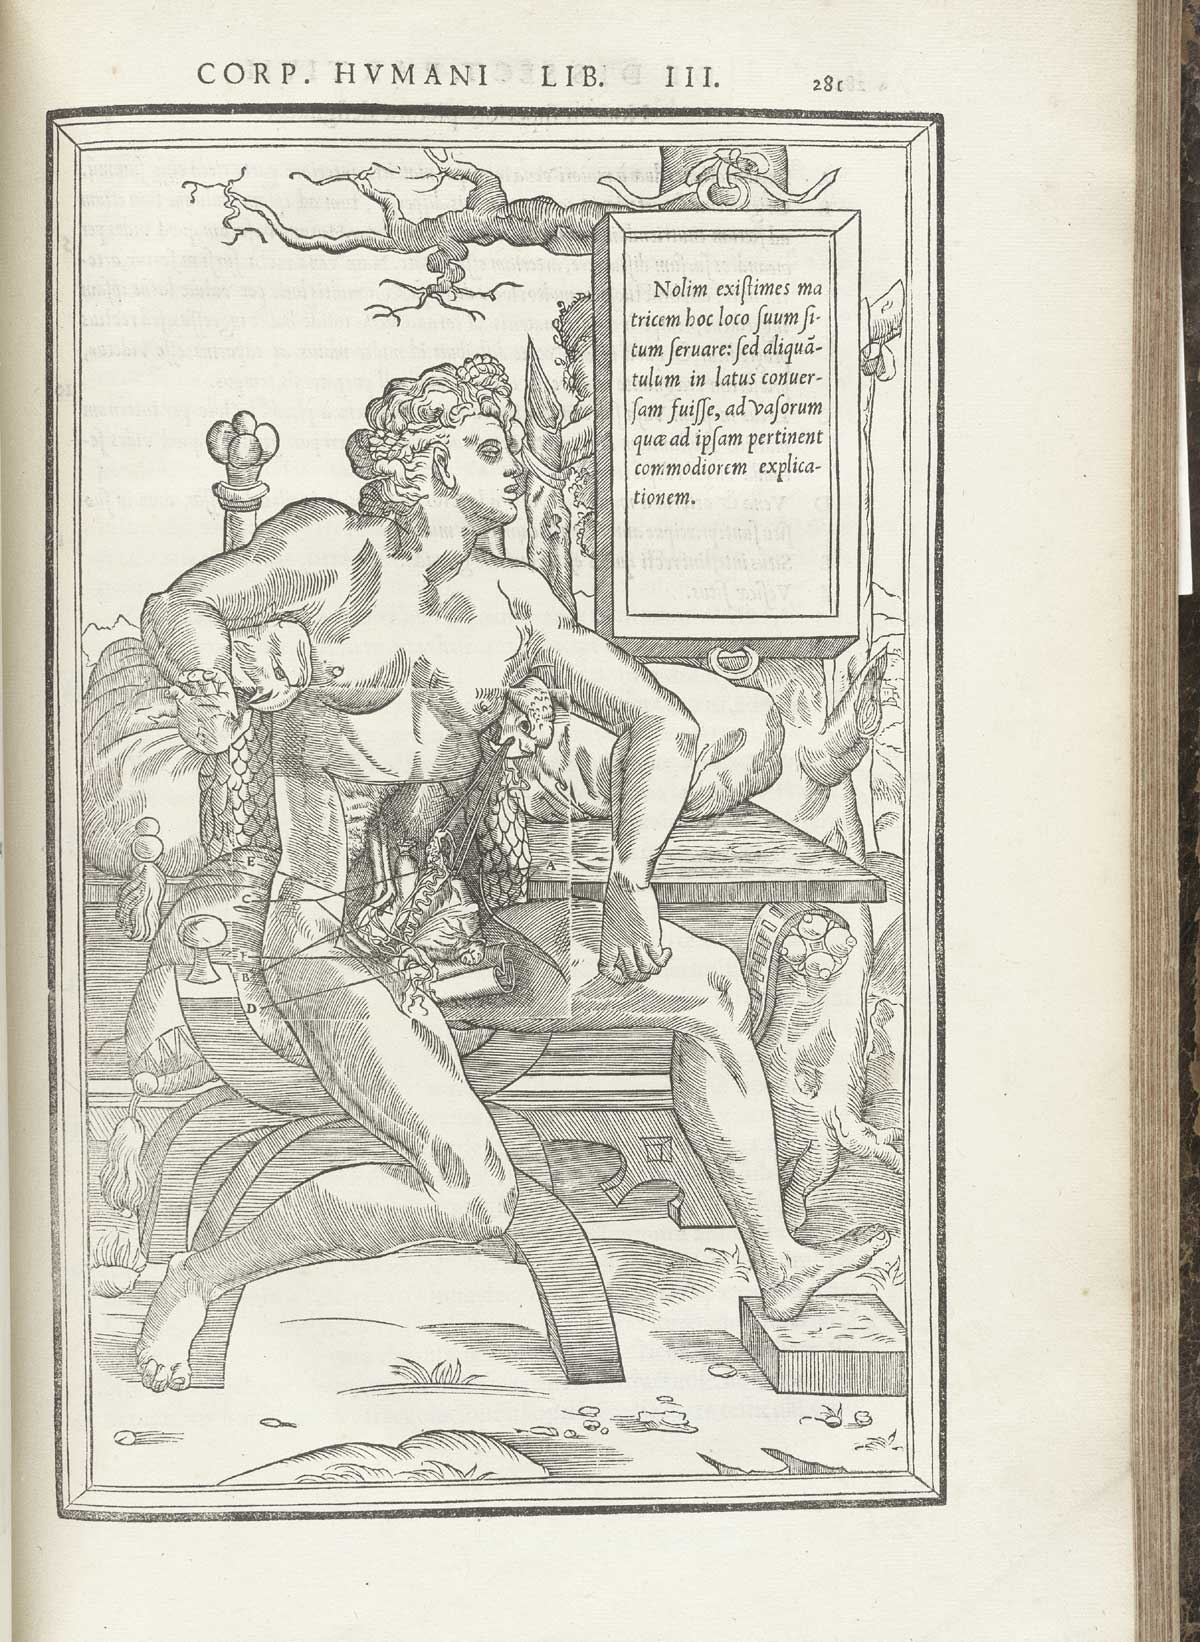 Woodcut of a facing female figure laying back on a Savonarola chair with layers of flesh removed from the abdomen to reveal the veins and arteries that attend the female reproductive system; the woman has flowing hair and is facing to the right; a tablet giving text in Latin about the indicated body parts hangs above and to the right of the figure; from Charles Estienne’s De dissection partium corporis humani libri tres, NLM Call no.: WZ 240 E81dd 1545.